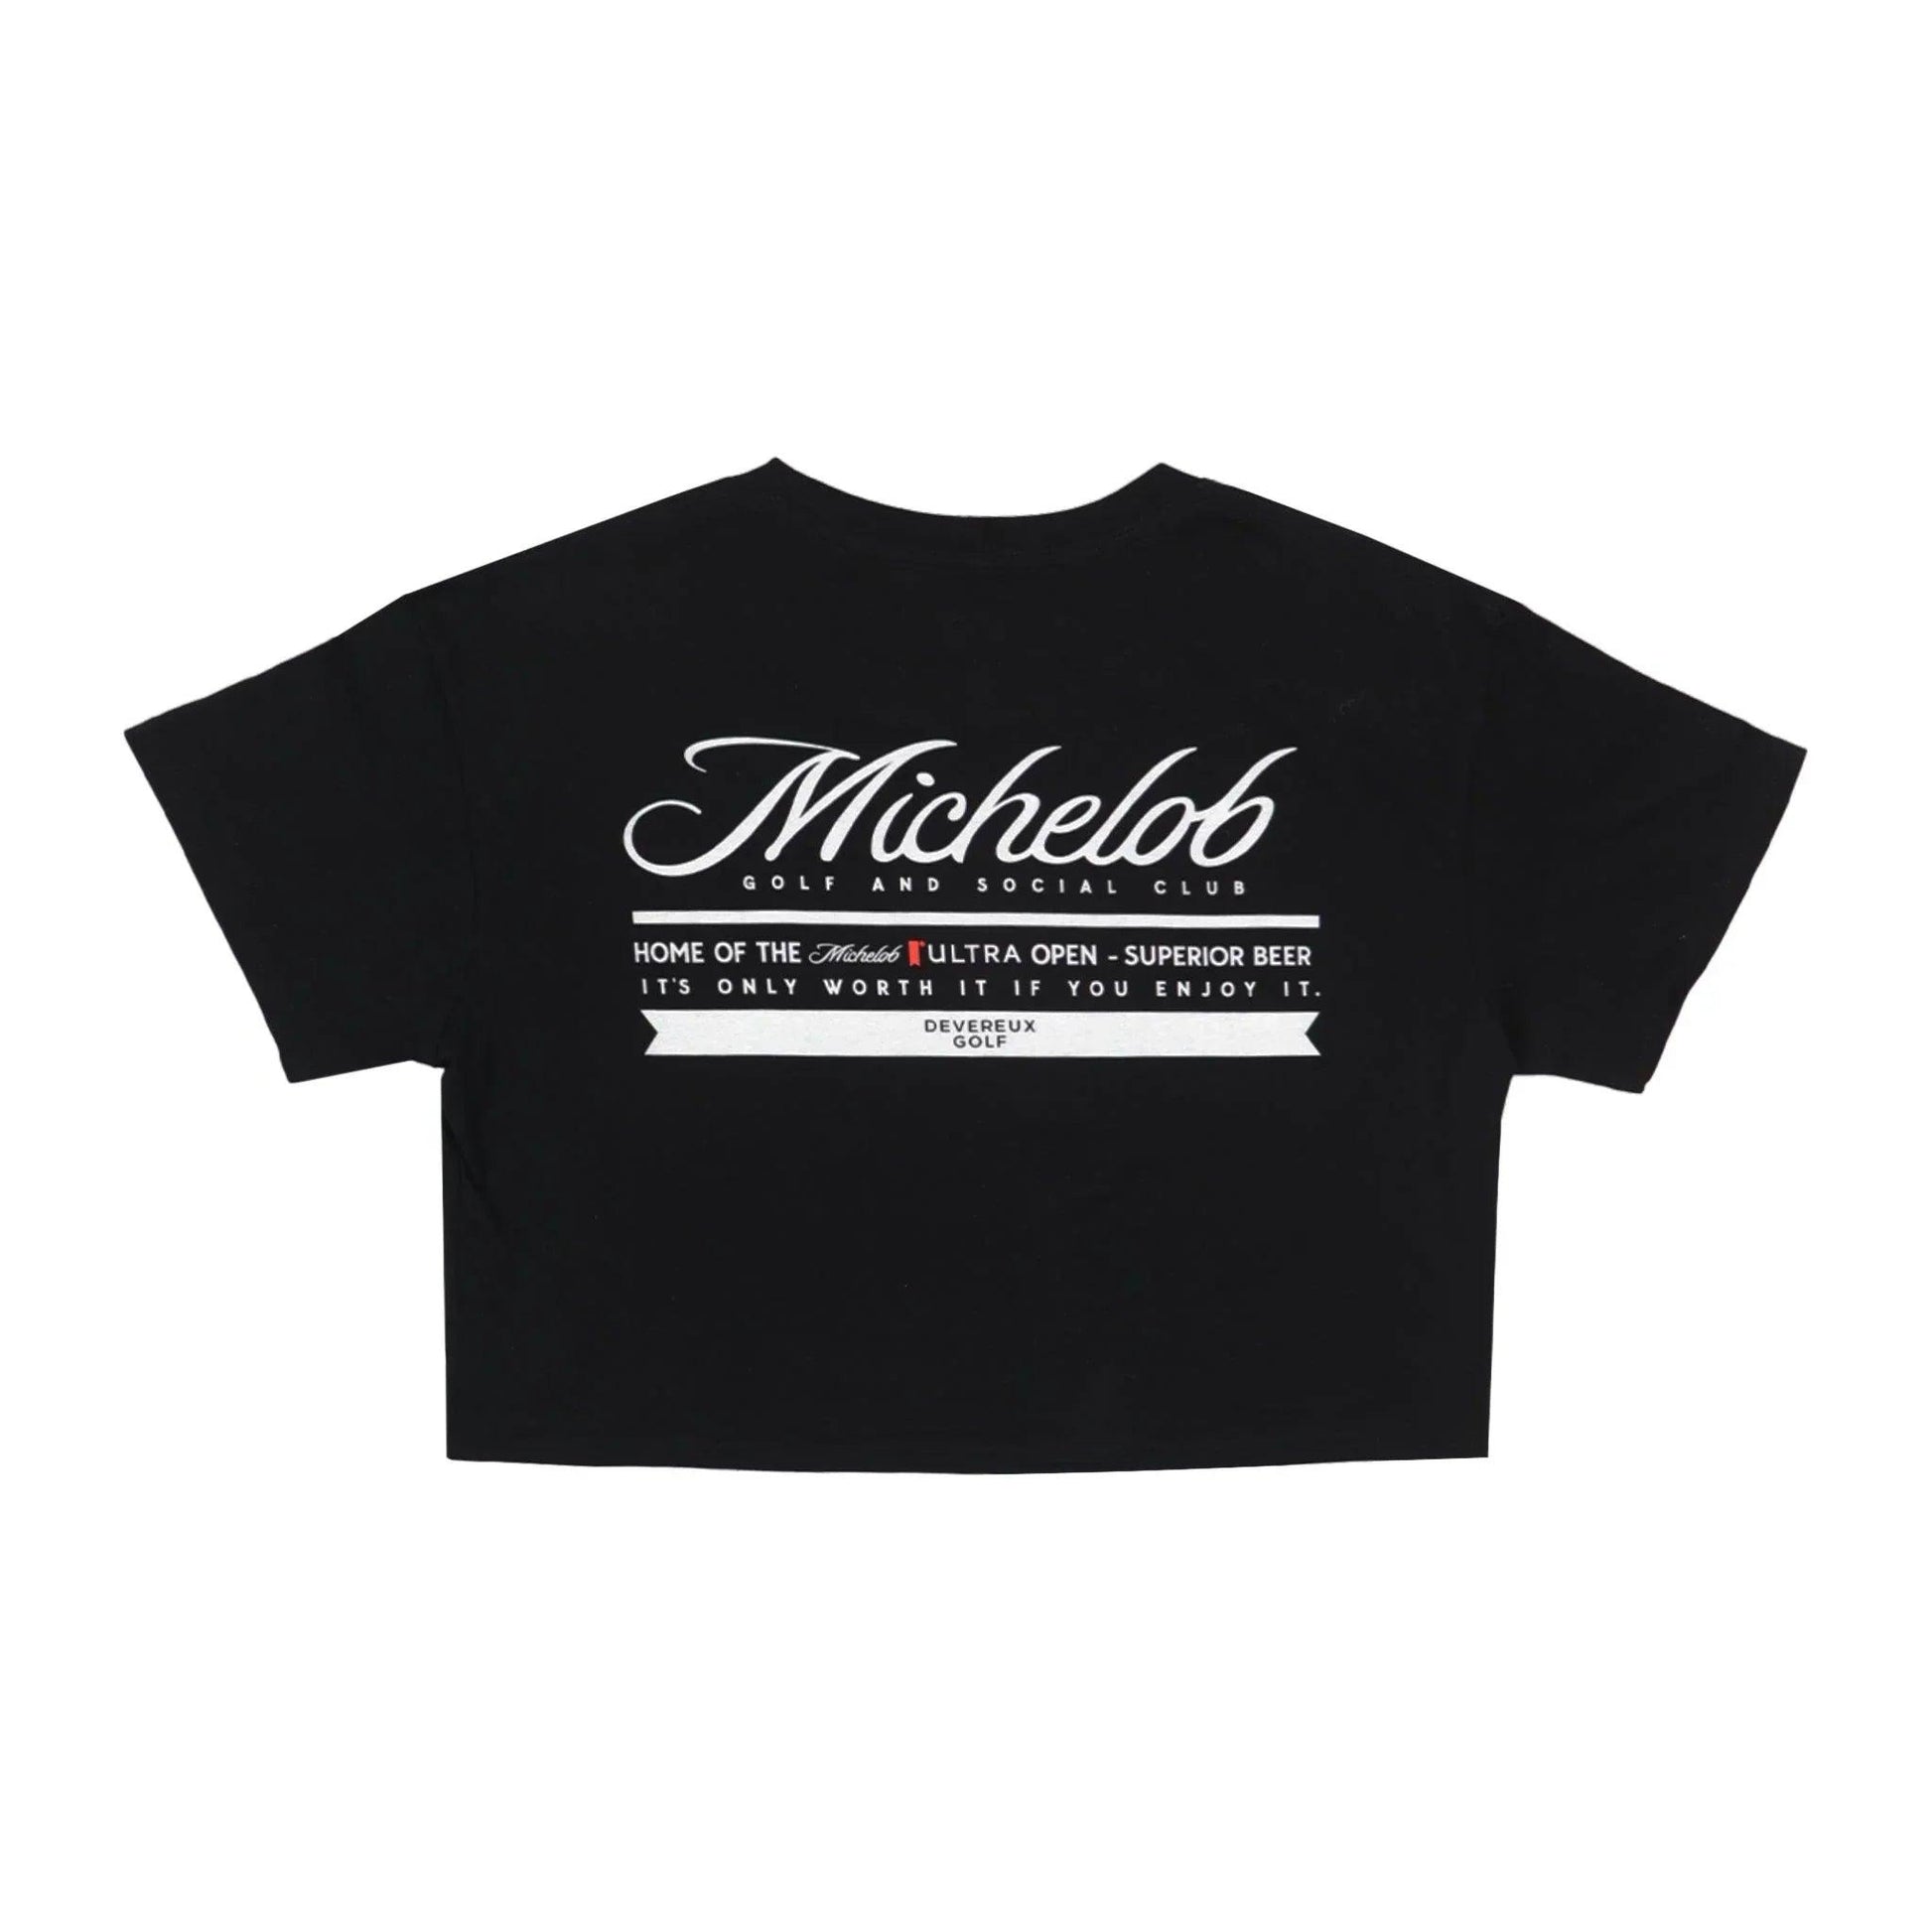 Back of shirt with full back logo Michelob Golf and Social club